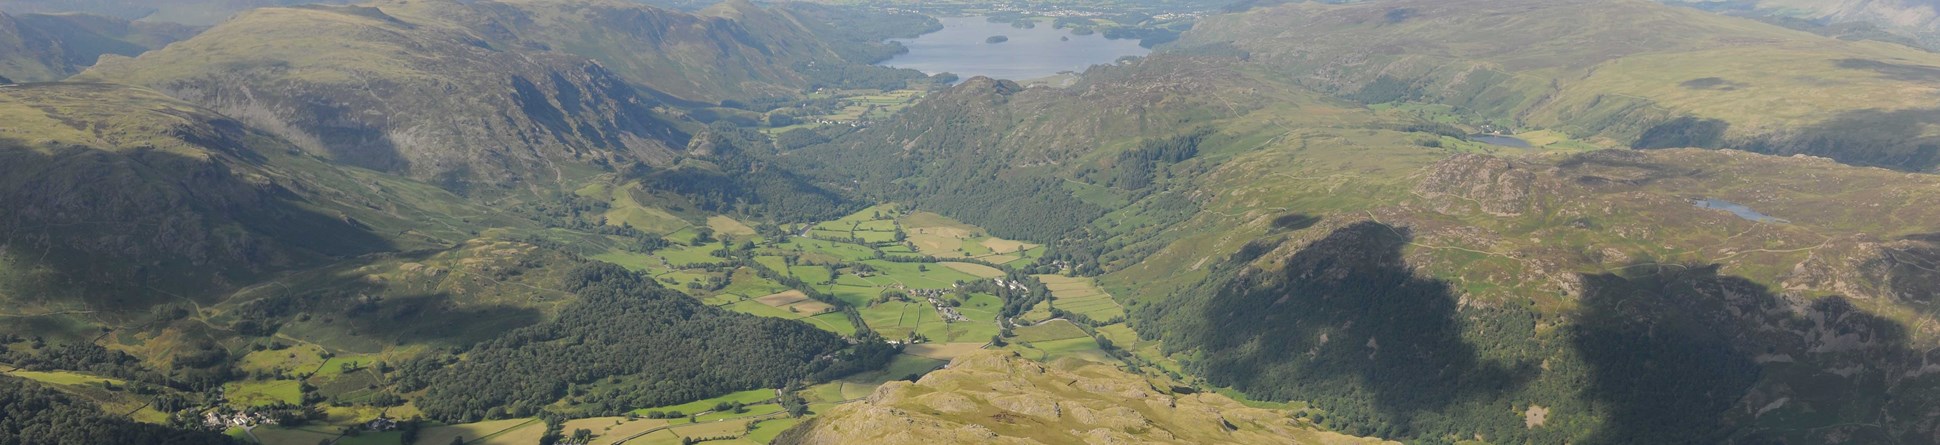 Aerial view of Rosthwaite Fell with Derwent Water and Bassenthwaite Lake in the distance.